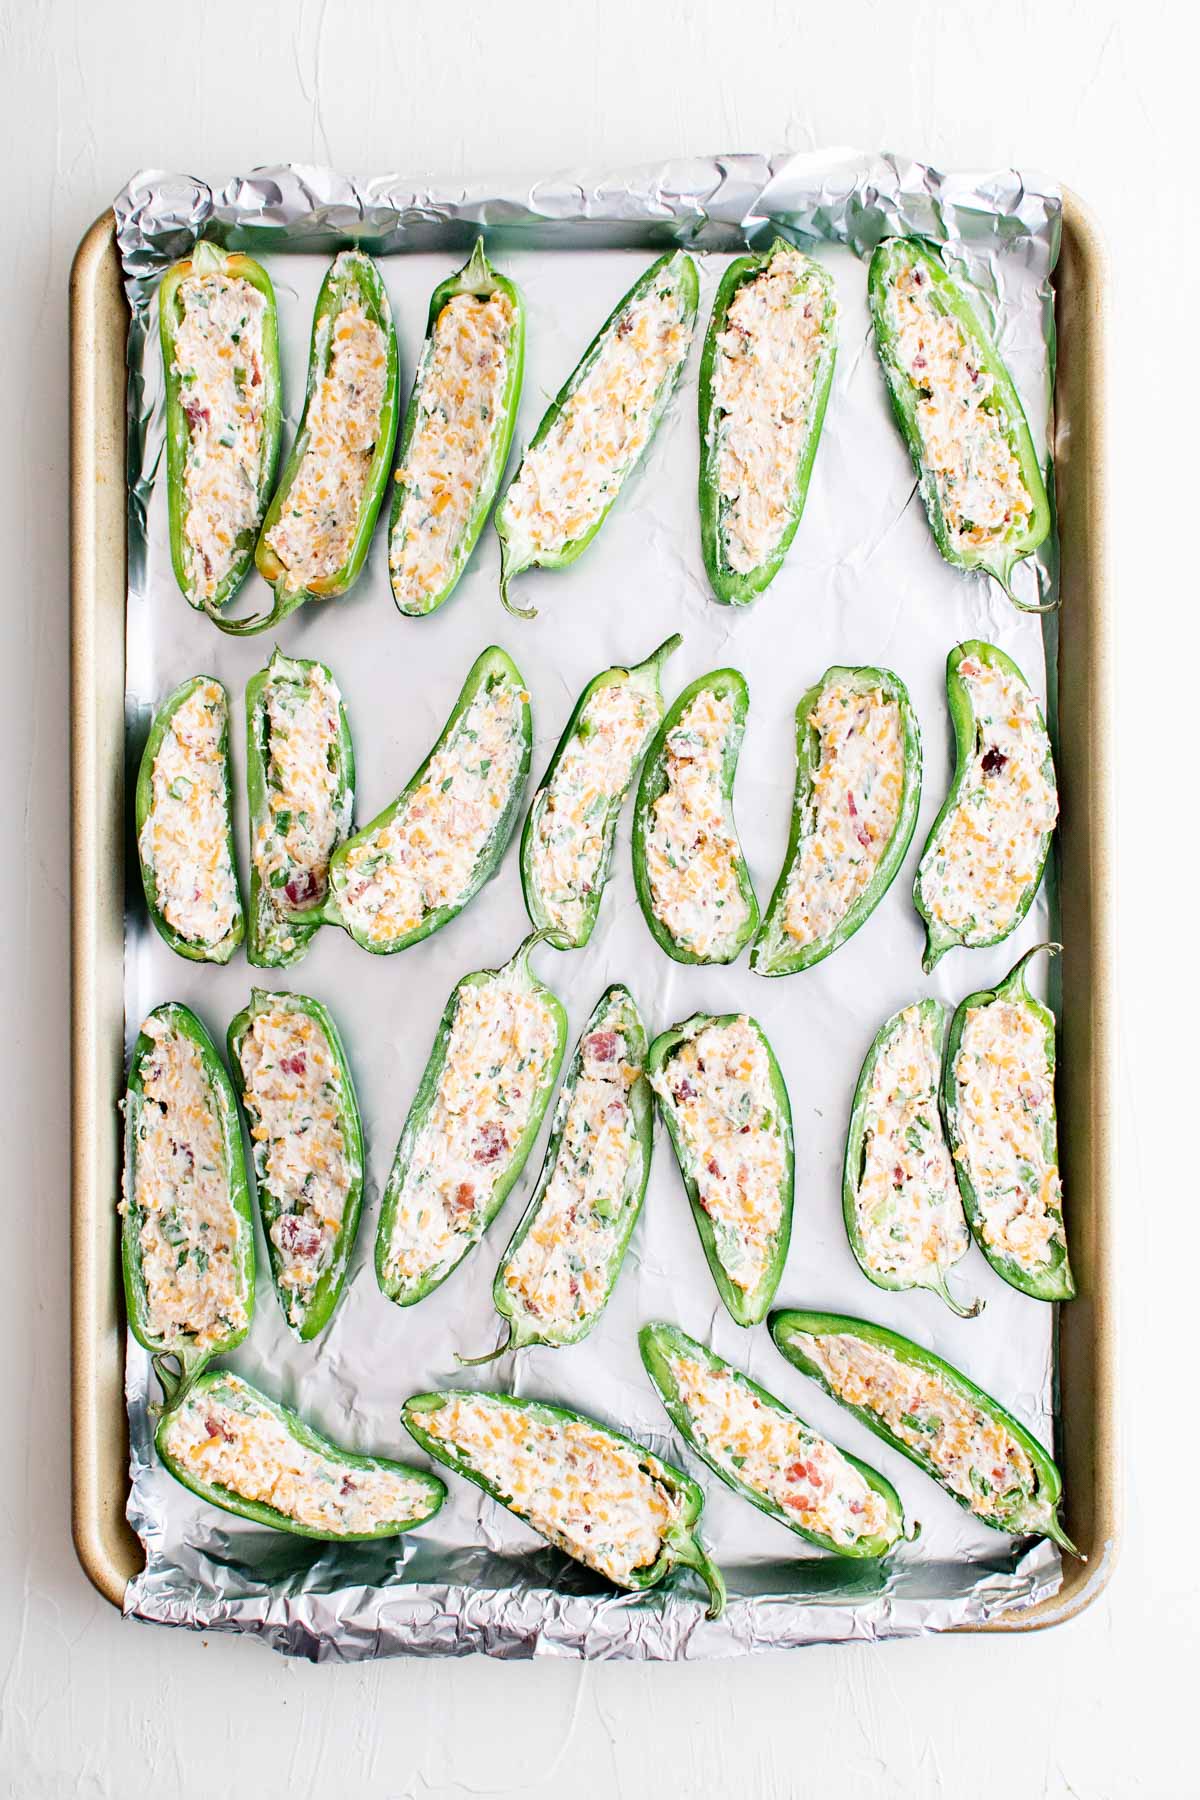 jalapeno popper with filling on a baking tray